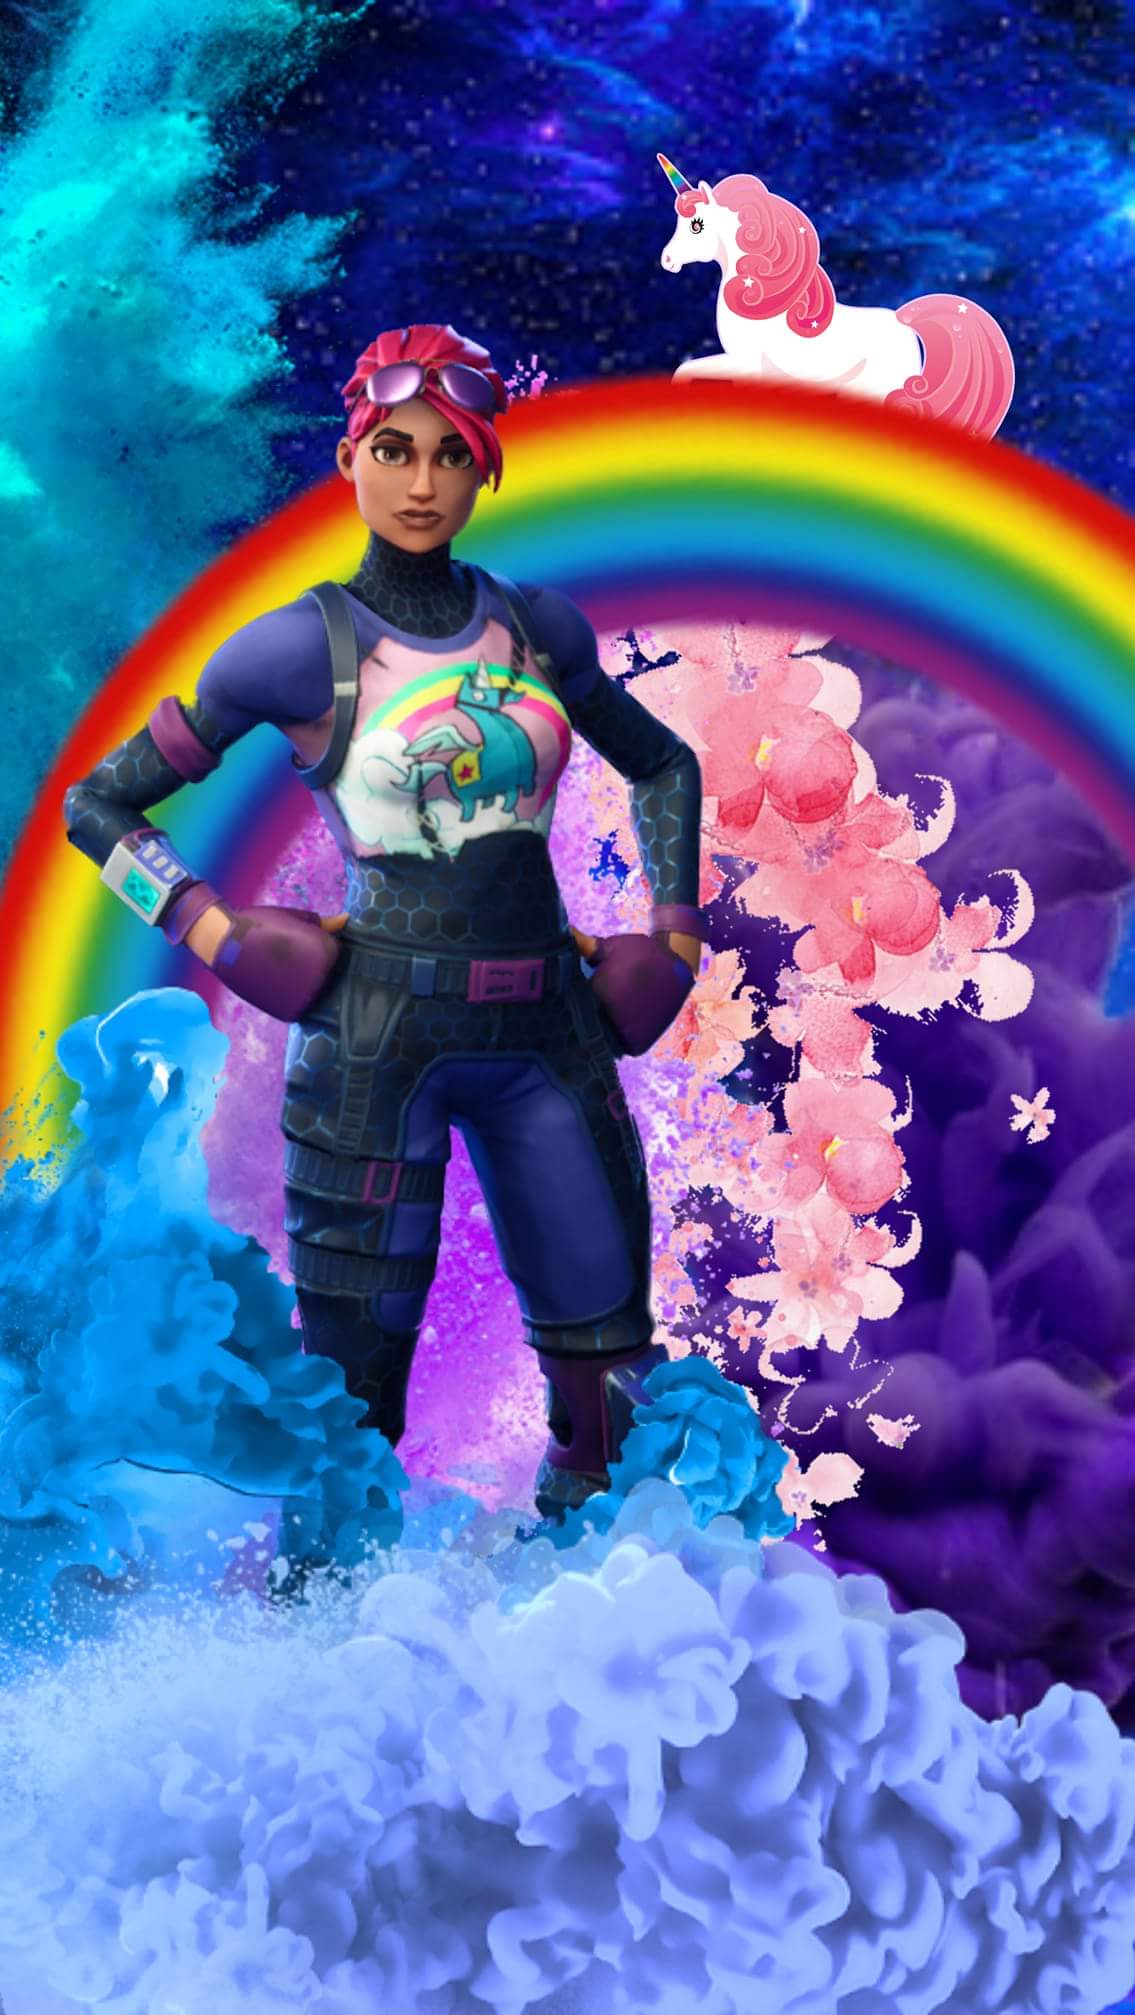 I Make fortnite wallpaper for your phone Let me know what you